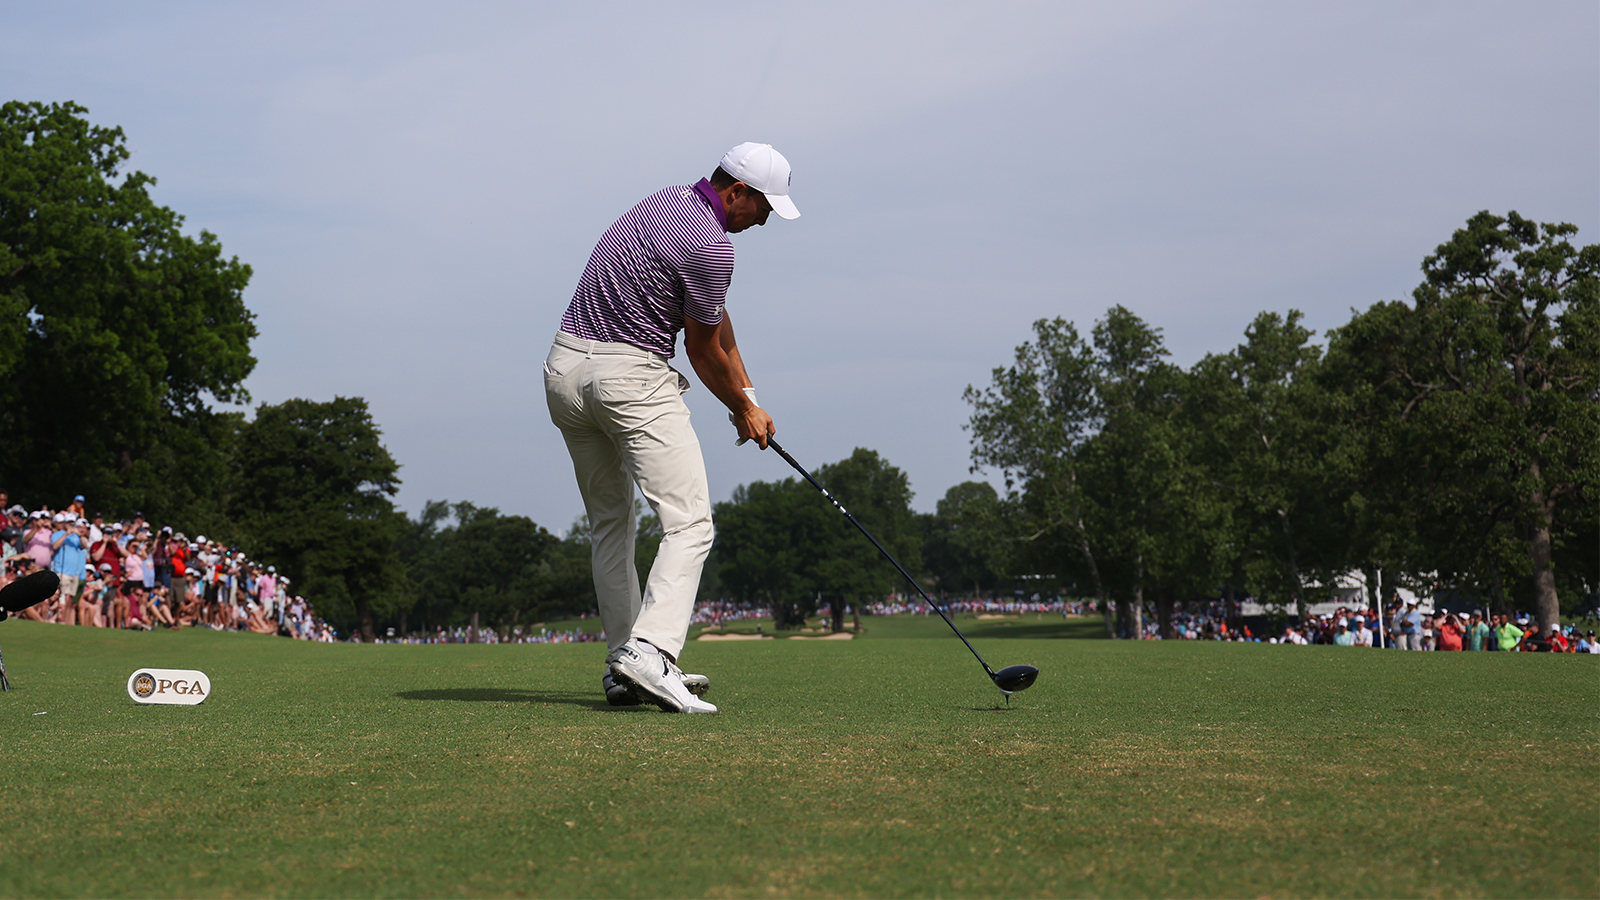 Jordan Spieth hits his tee shot during the first round of the 2022 PGA Championship held at Southern Hills Country Club on May 19, 2022 in Tulsa, Oklahoma. (Photo by Maddie Meyer/PGA of America)